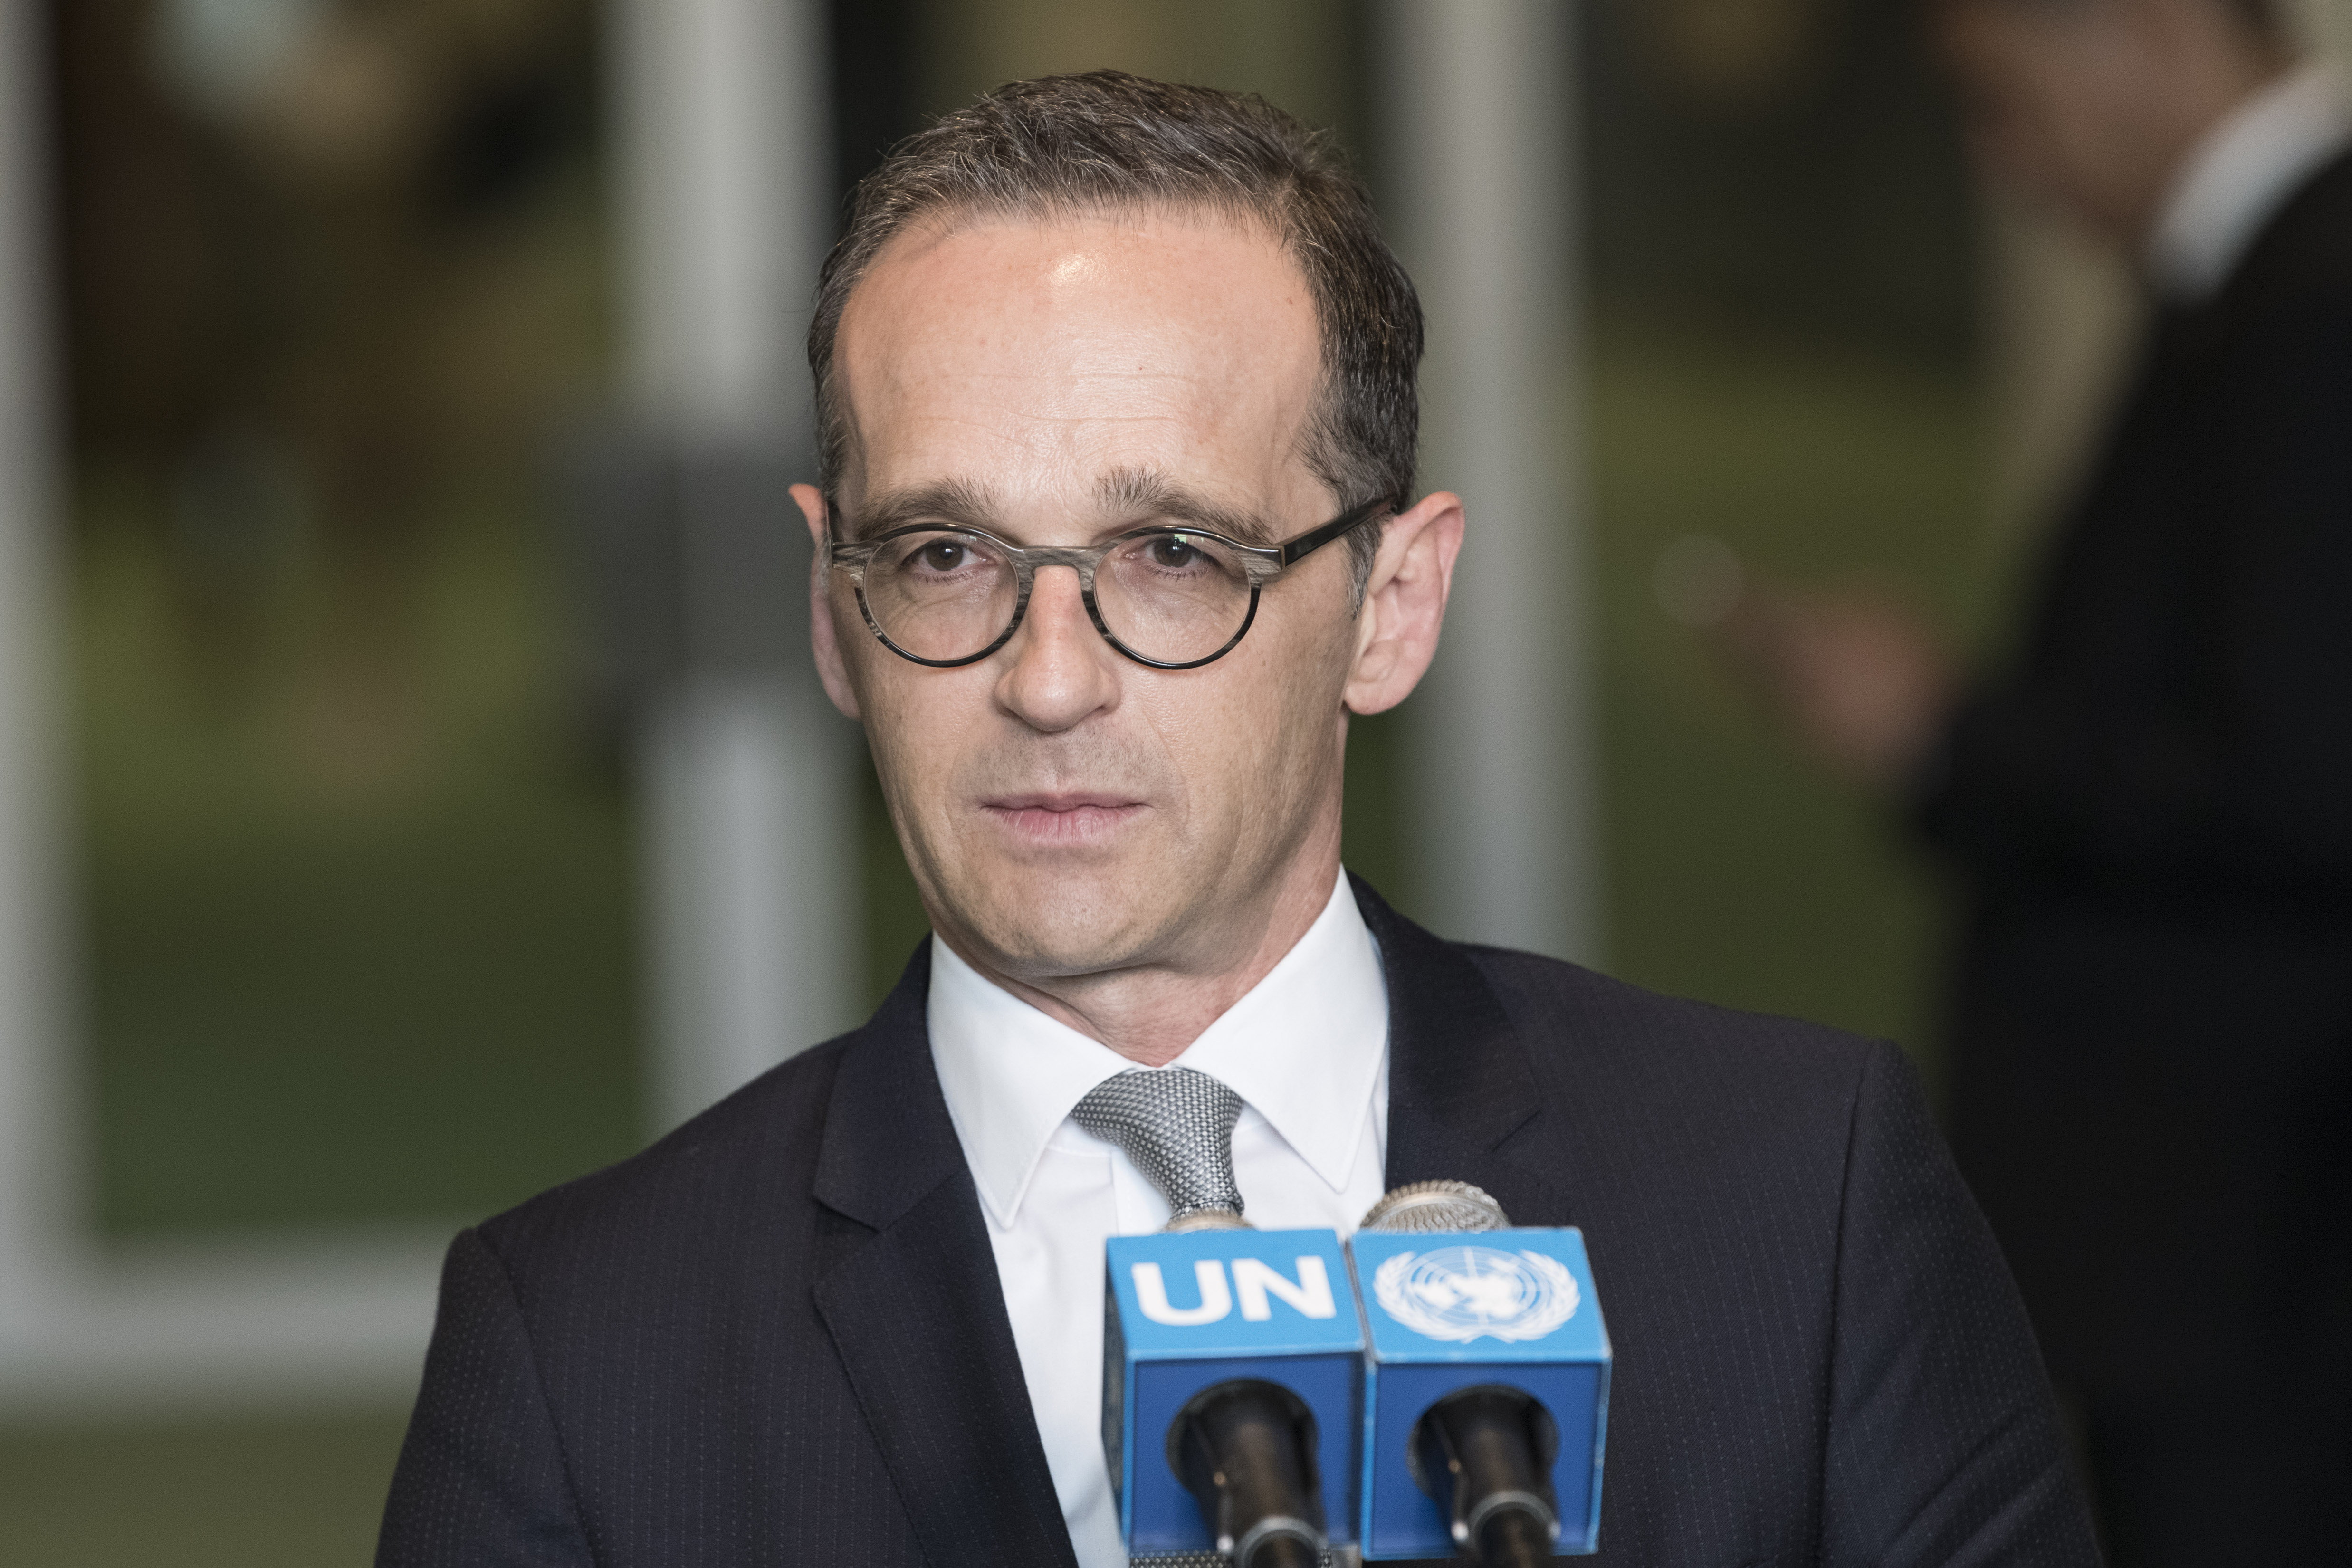 764925 German FM Maas after election to UNSC 2018.jpg